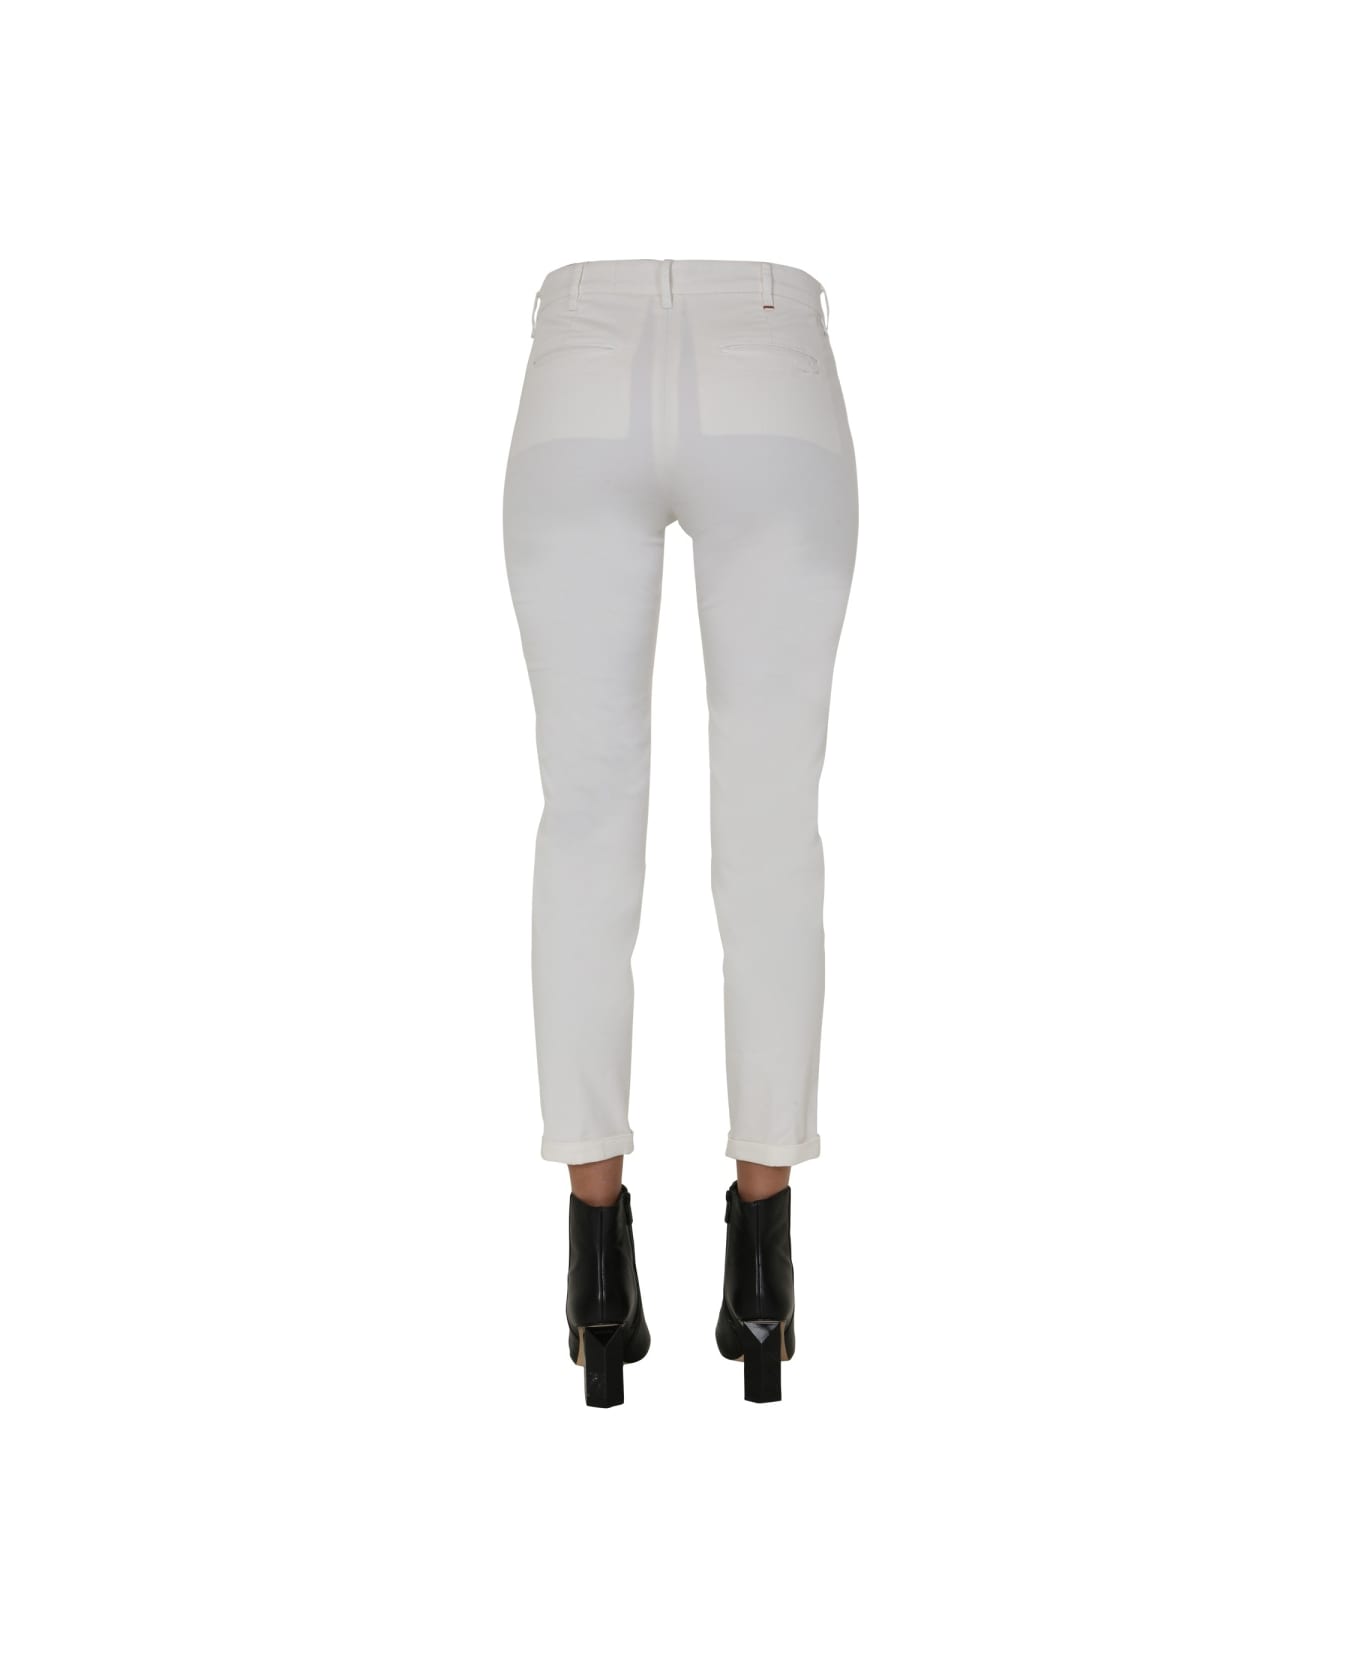 Pence "pooly / S" Trousers - WHITE